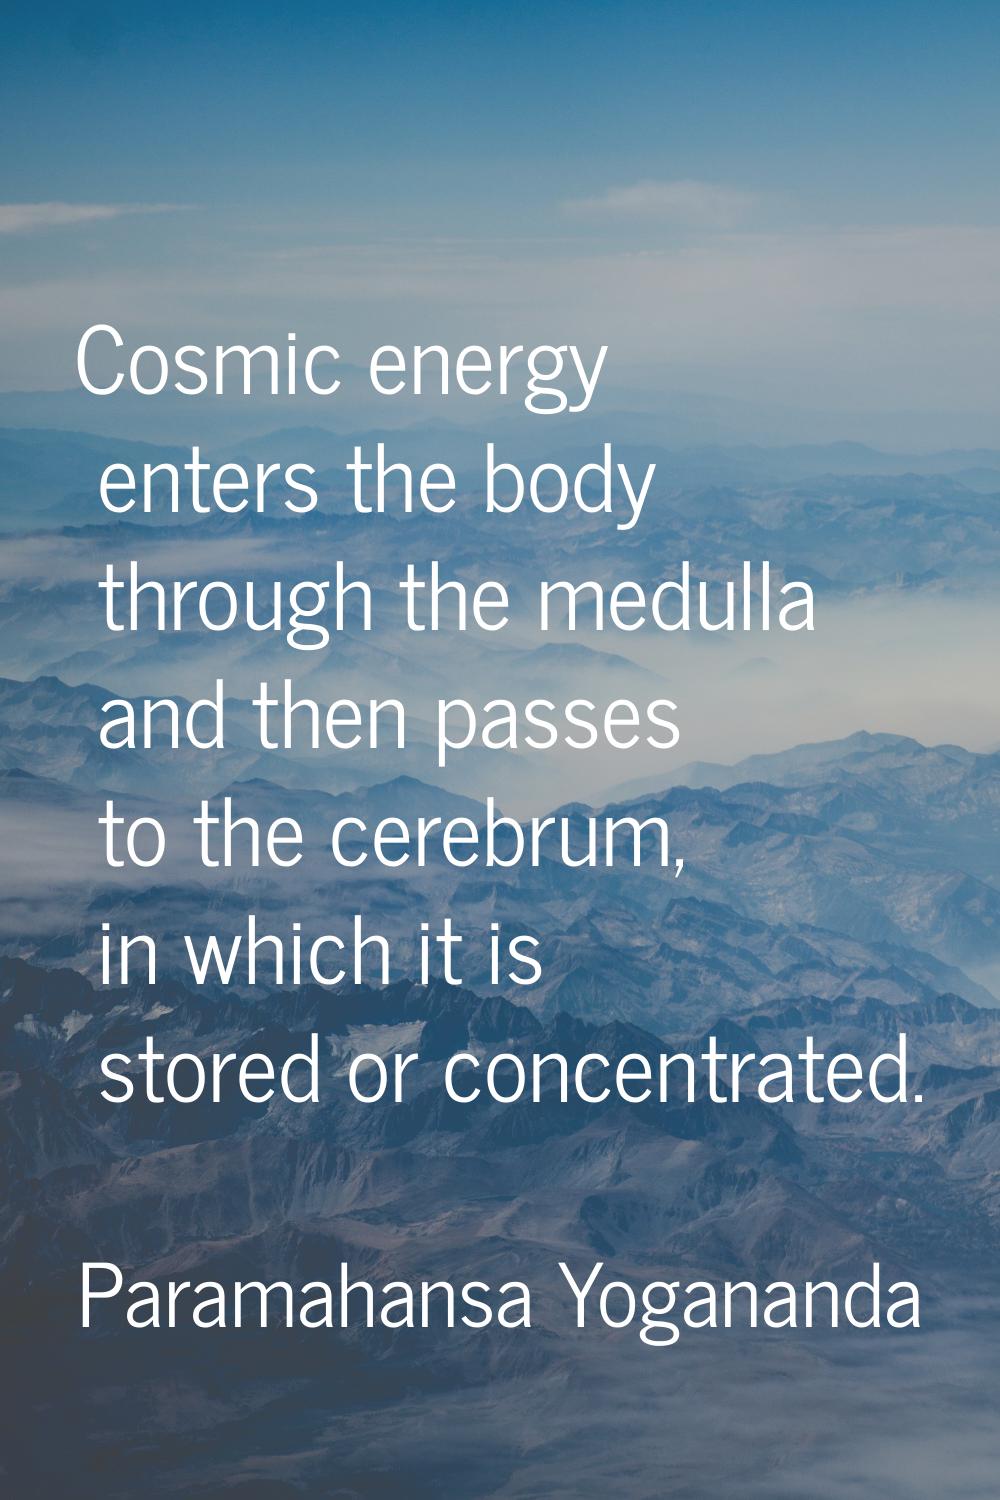 Cosmic energy enters the body through the medulla and then passes to the cerebrum, in which it is s